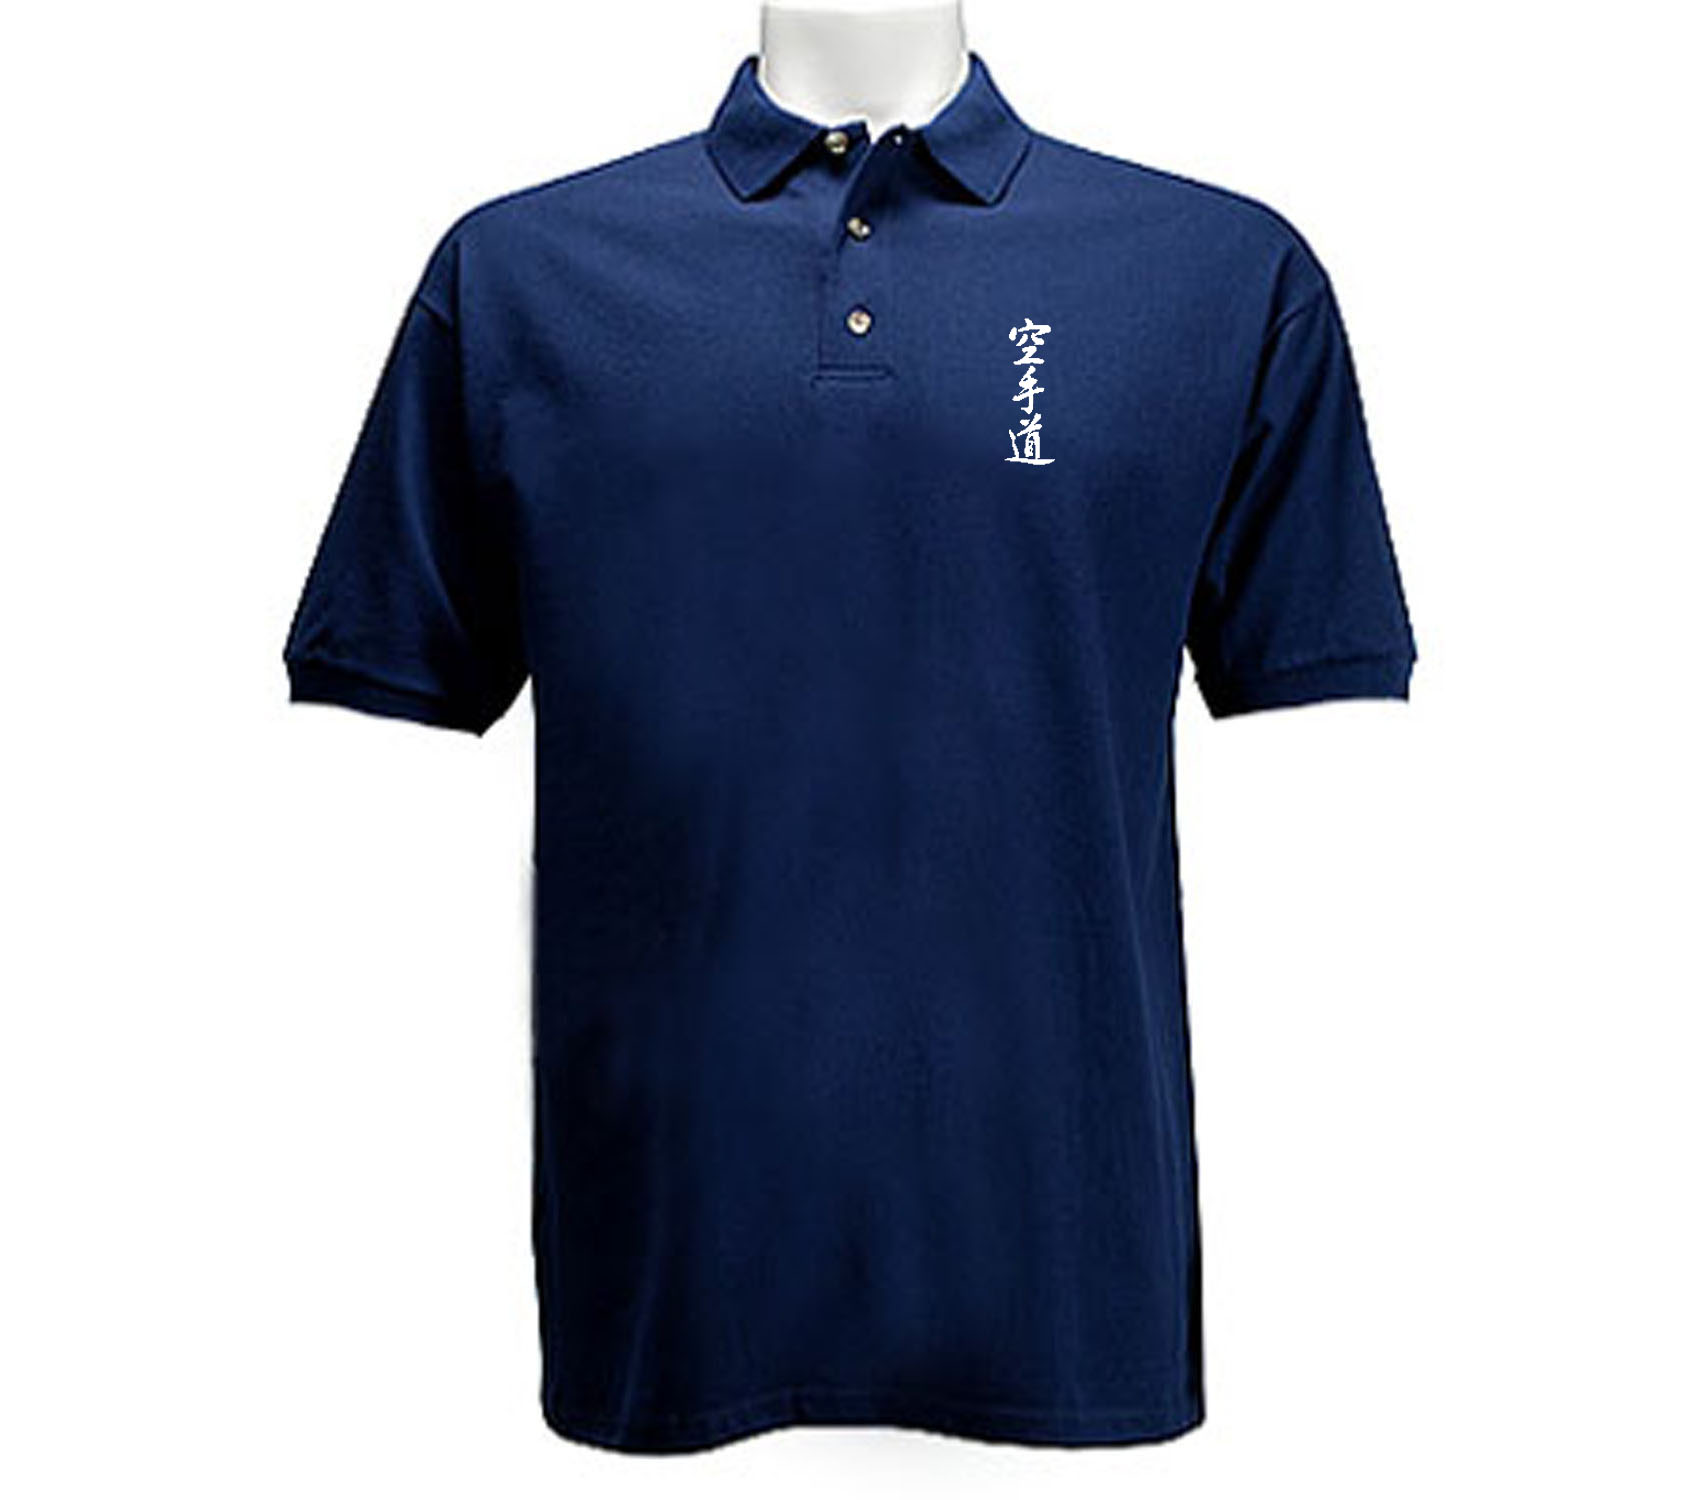 Karate navy blue polo style t-shirt